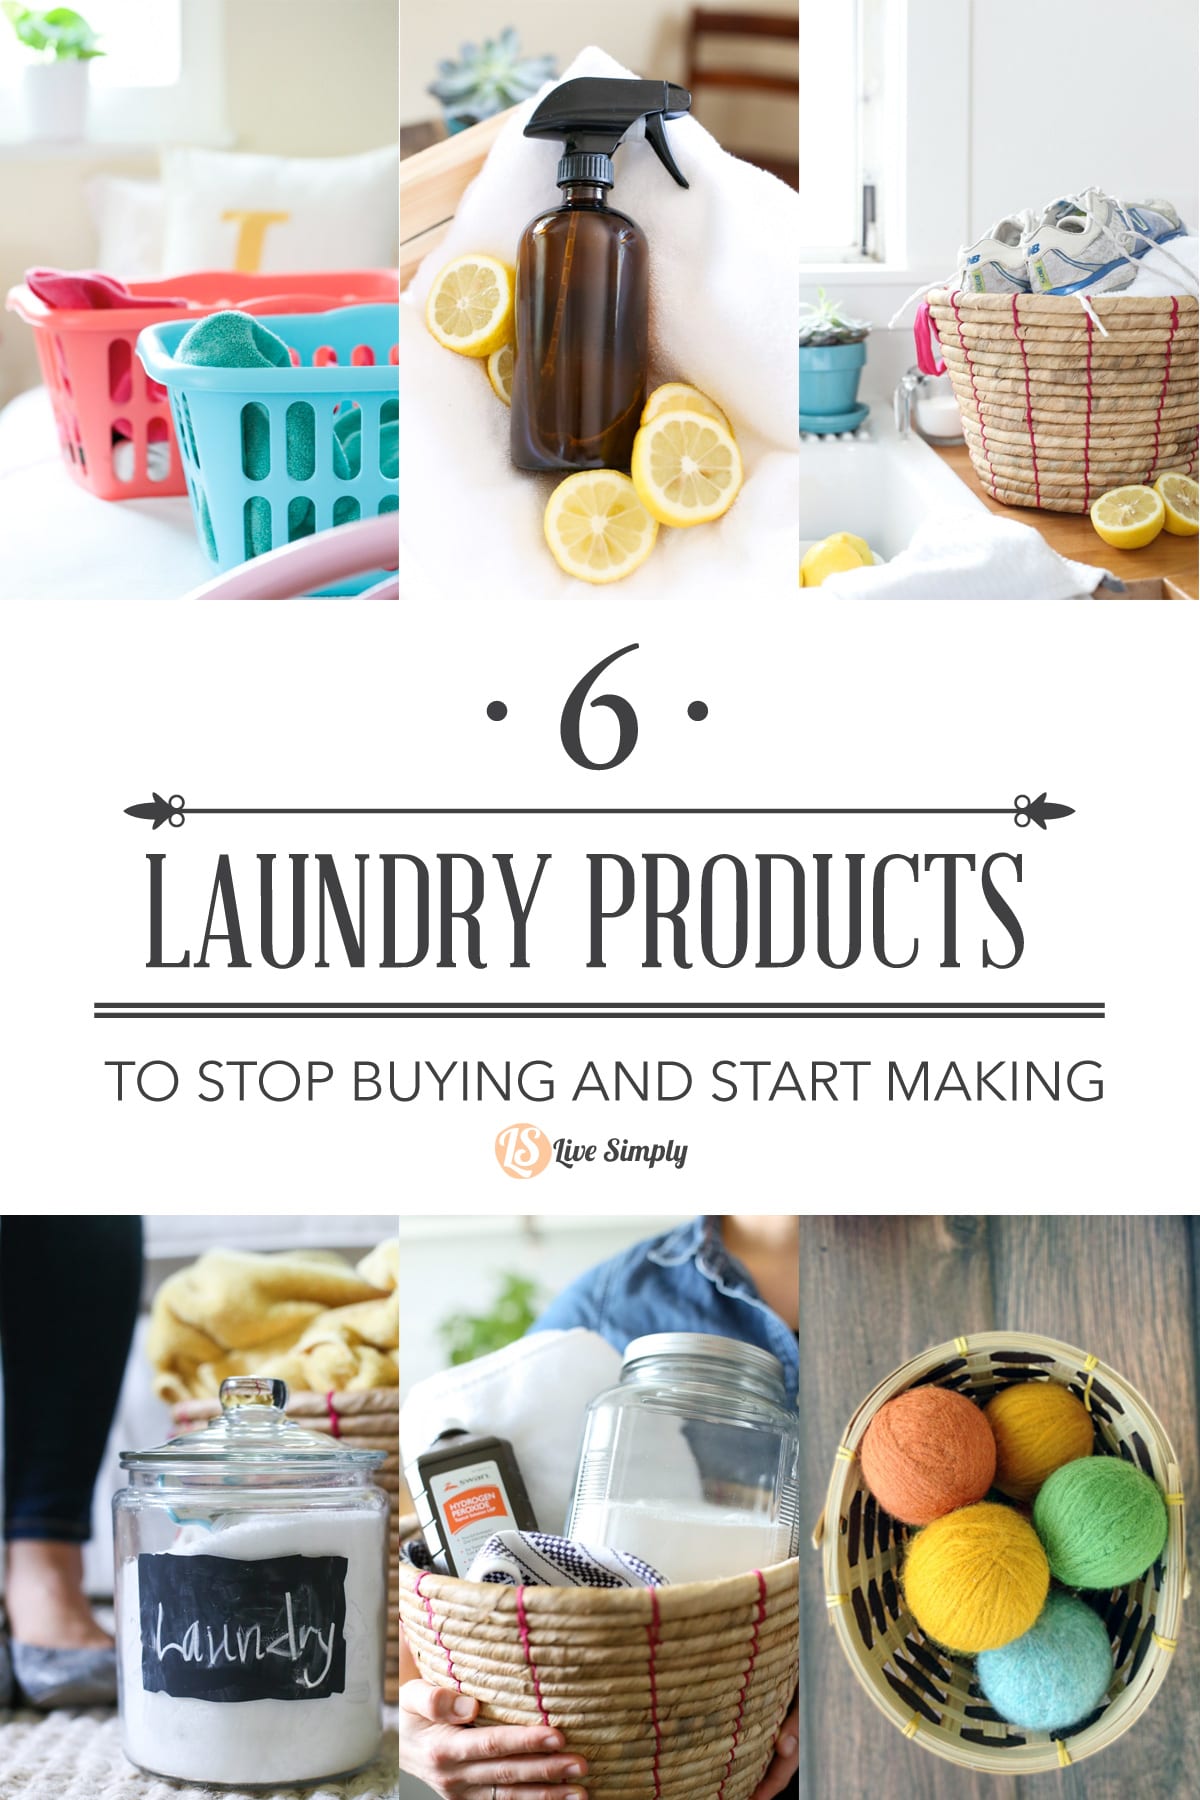 6 Laundry Products to Stop Buying and Start Making